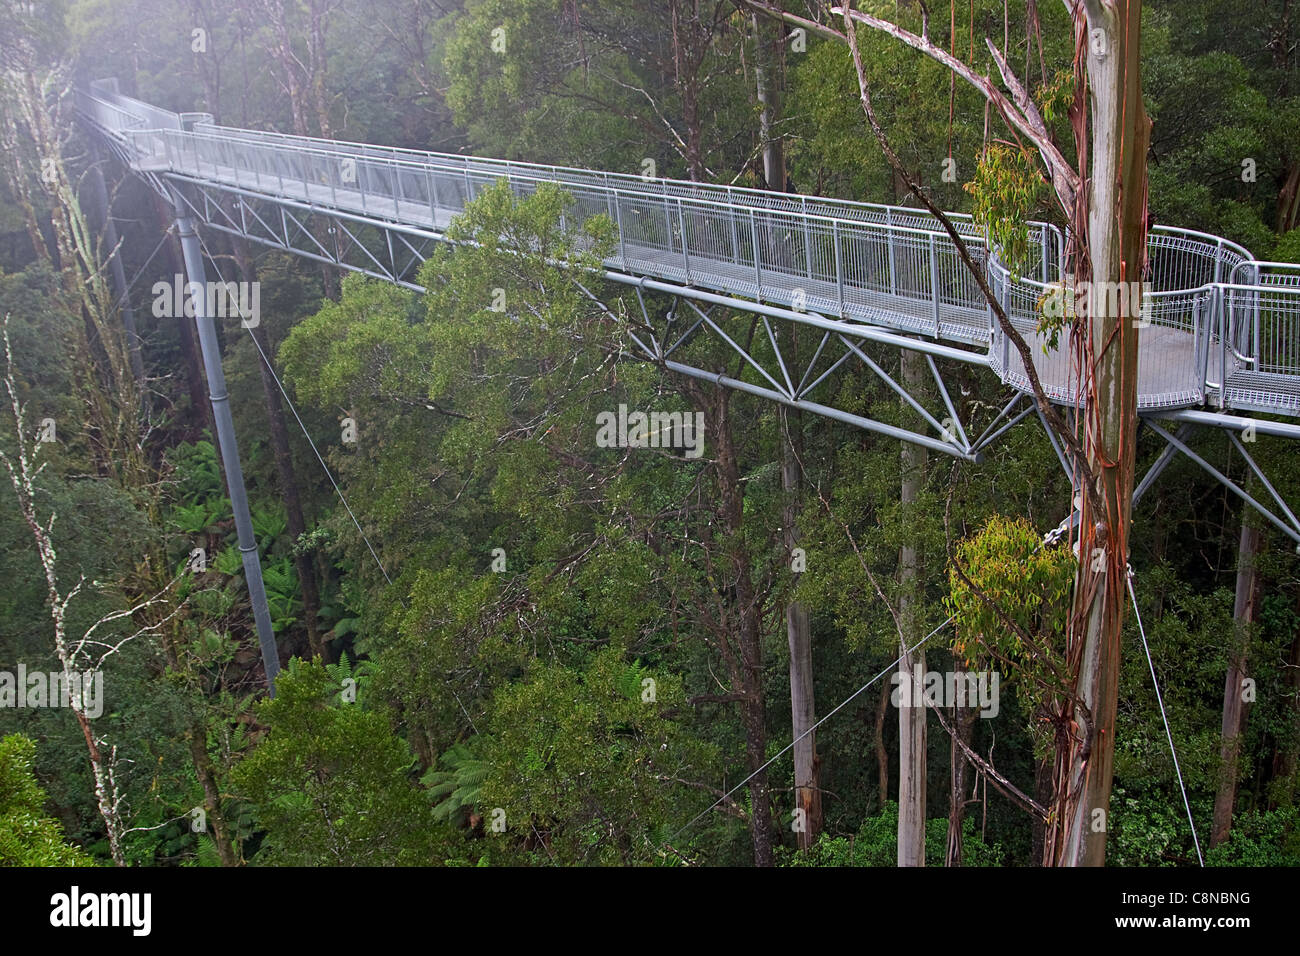 Australia, Victoria, Otway Ranges, Otway Fly and Treetop Walk, Elevated walkway through forest Stock Photo